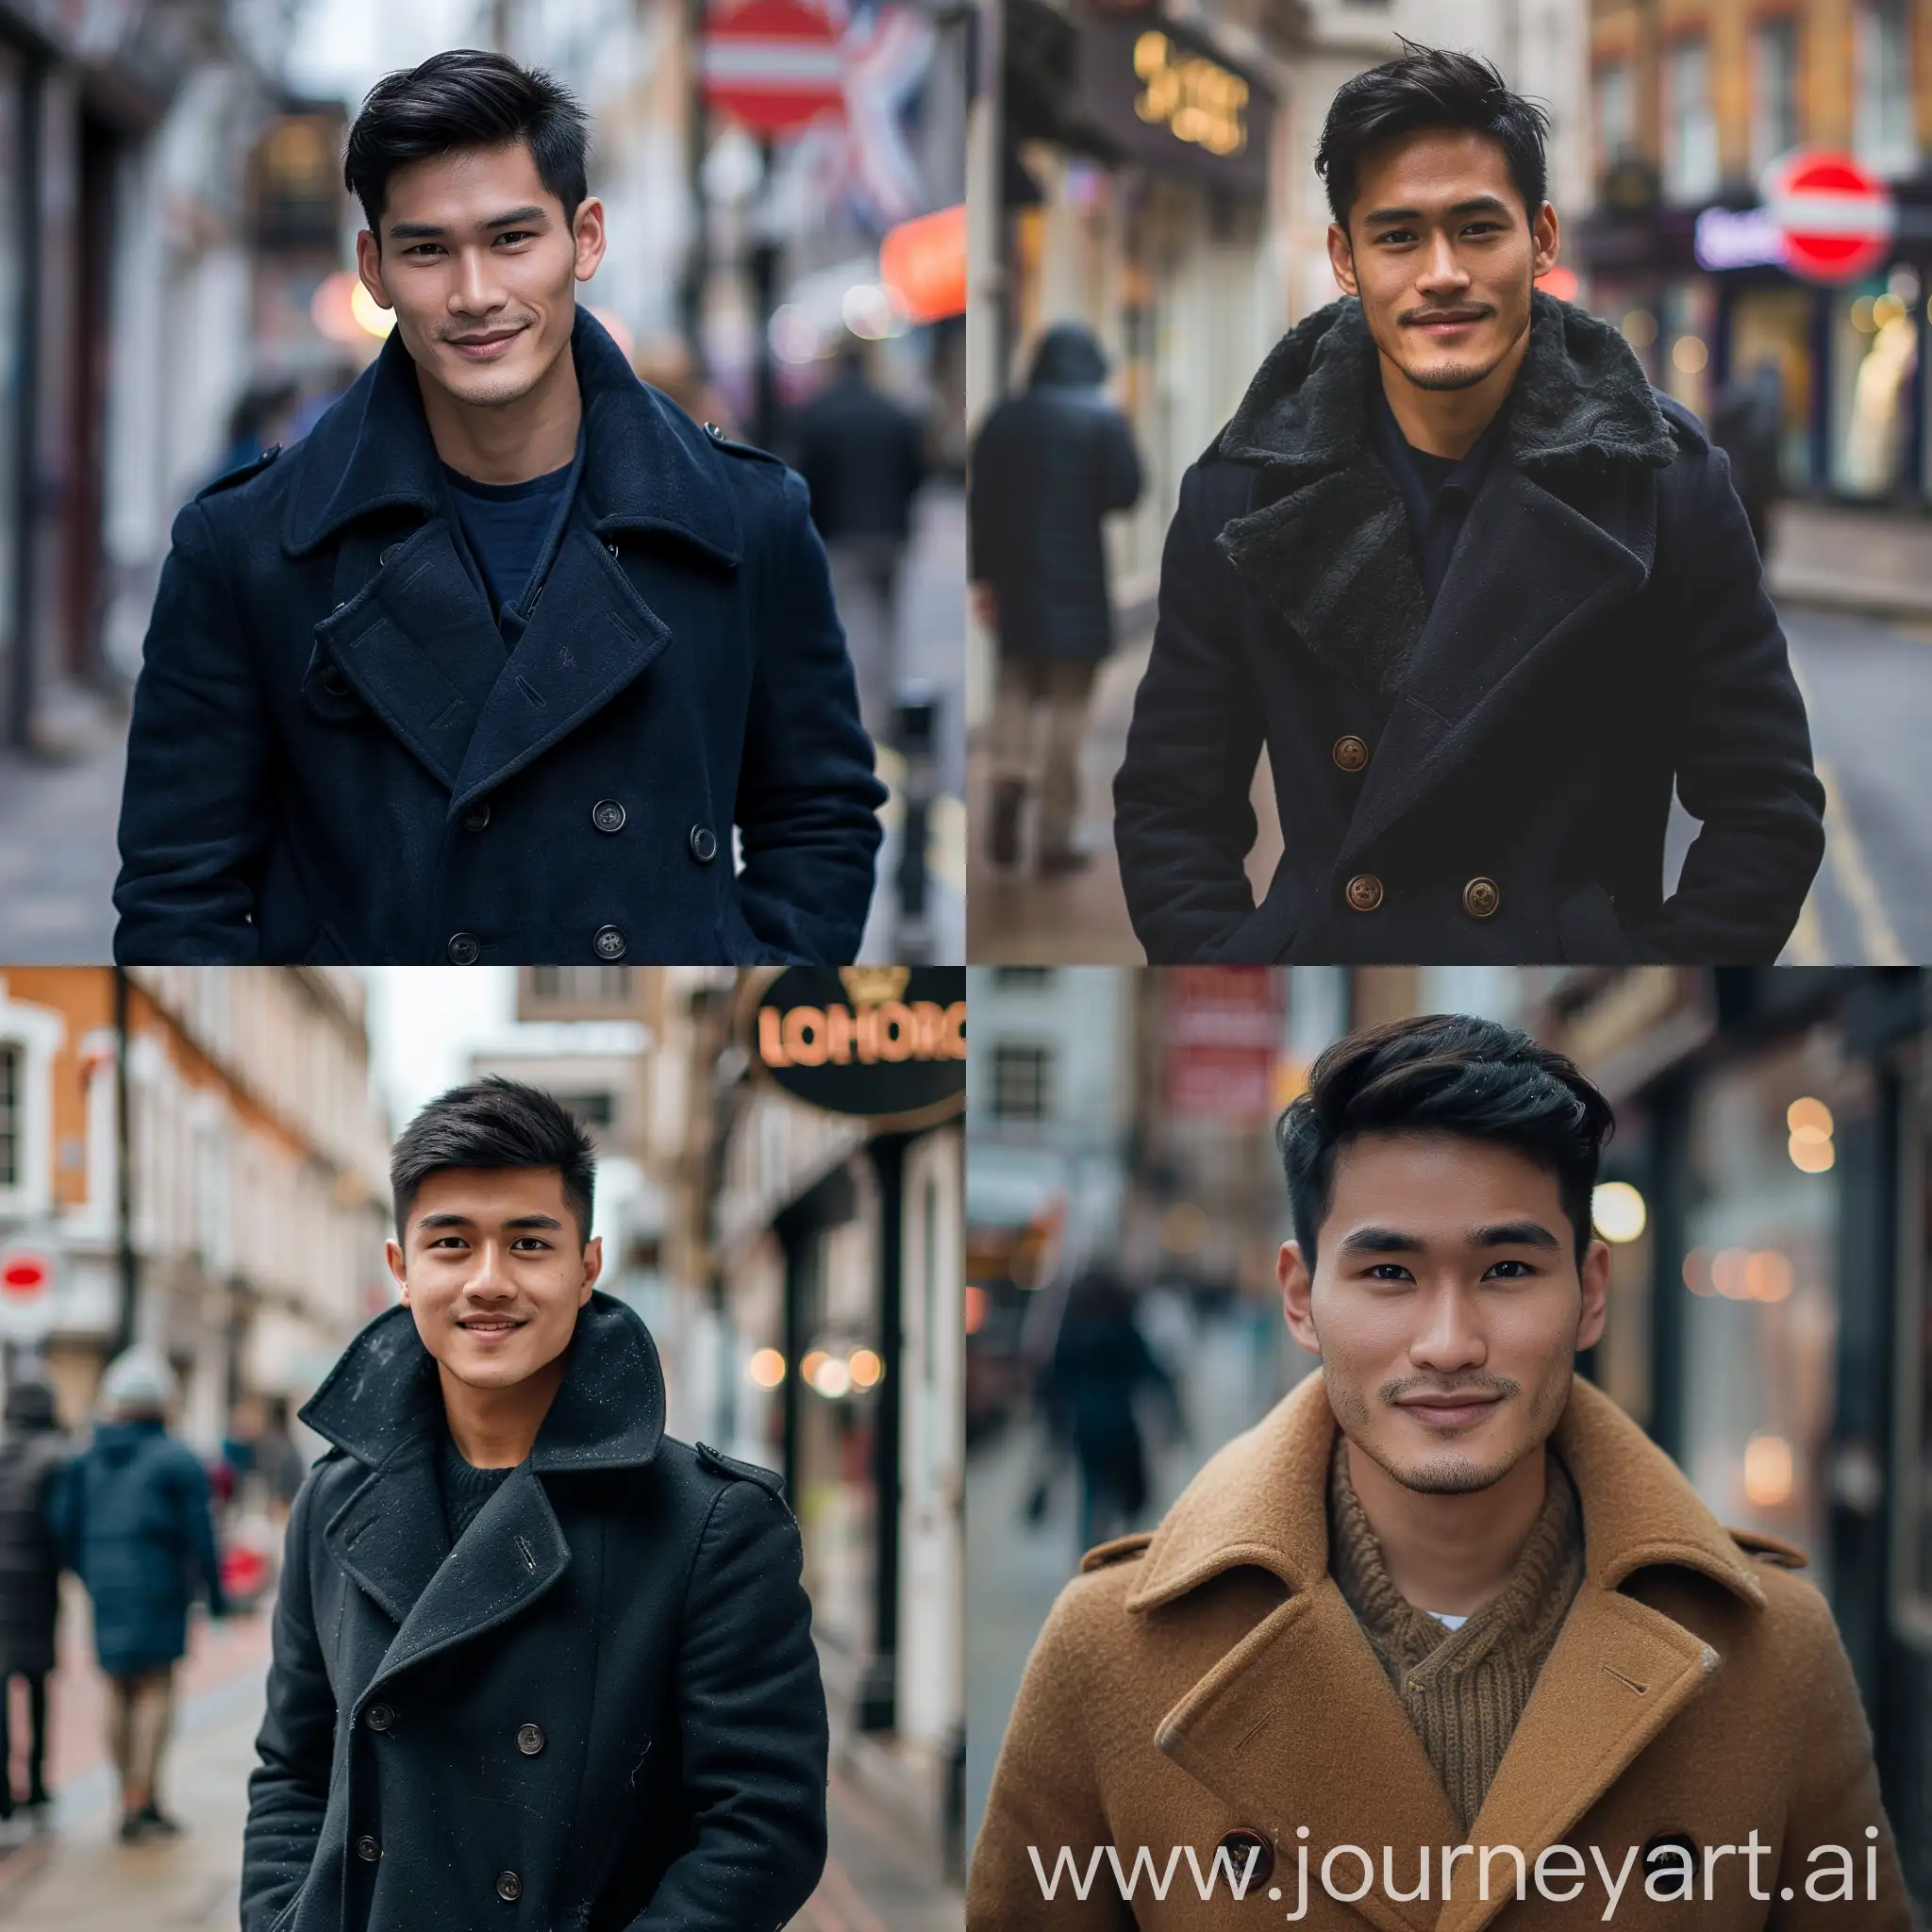 full body handsome boye 30 year old,thailand face,wearing peacoat jacket ,smile expresion,at the street london,realistis photo,hd,bright ultra,4k